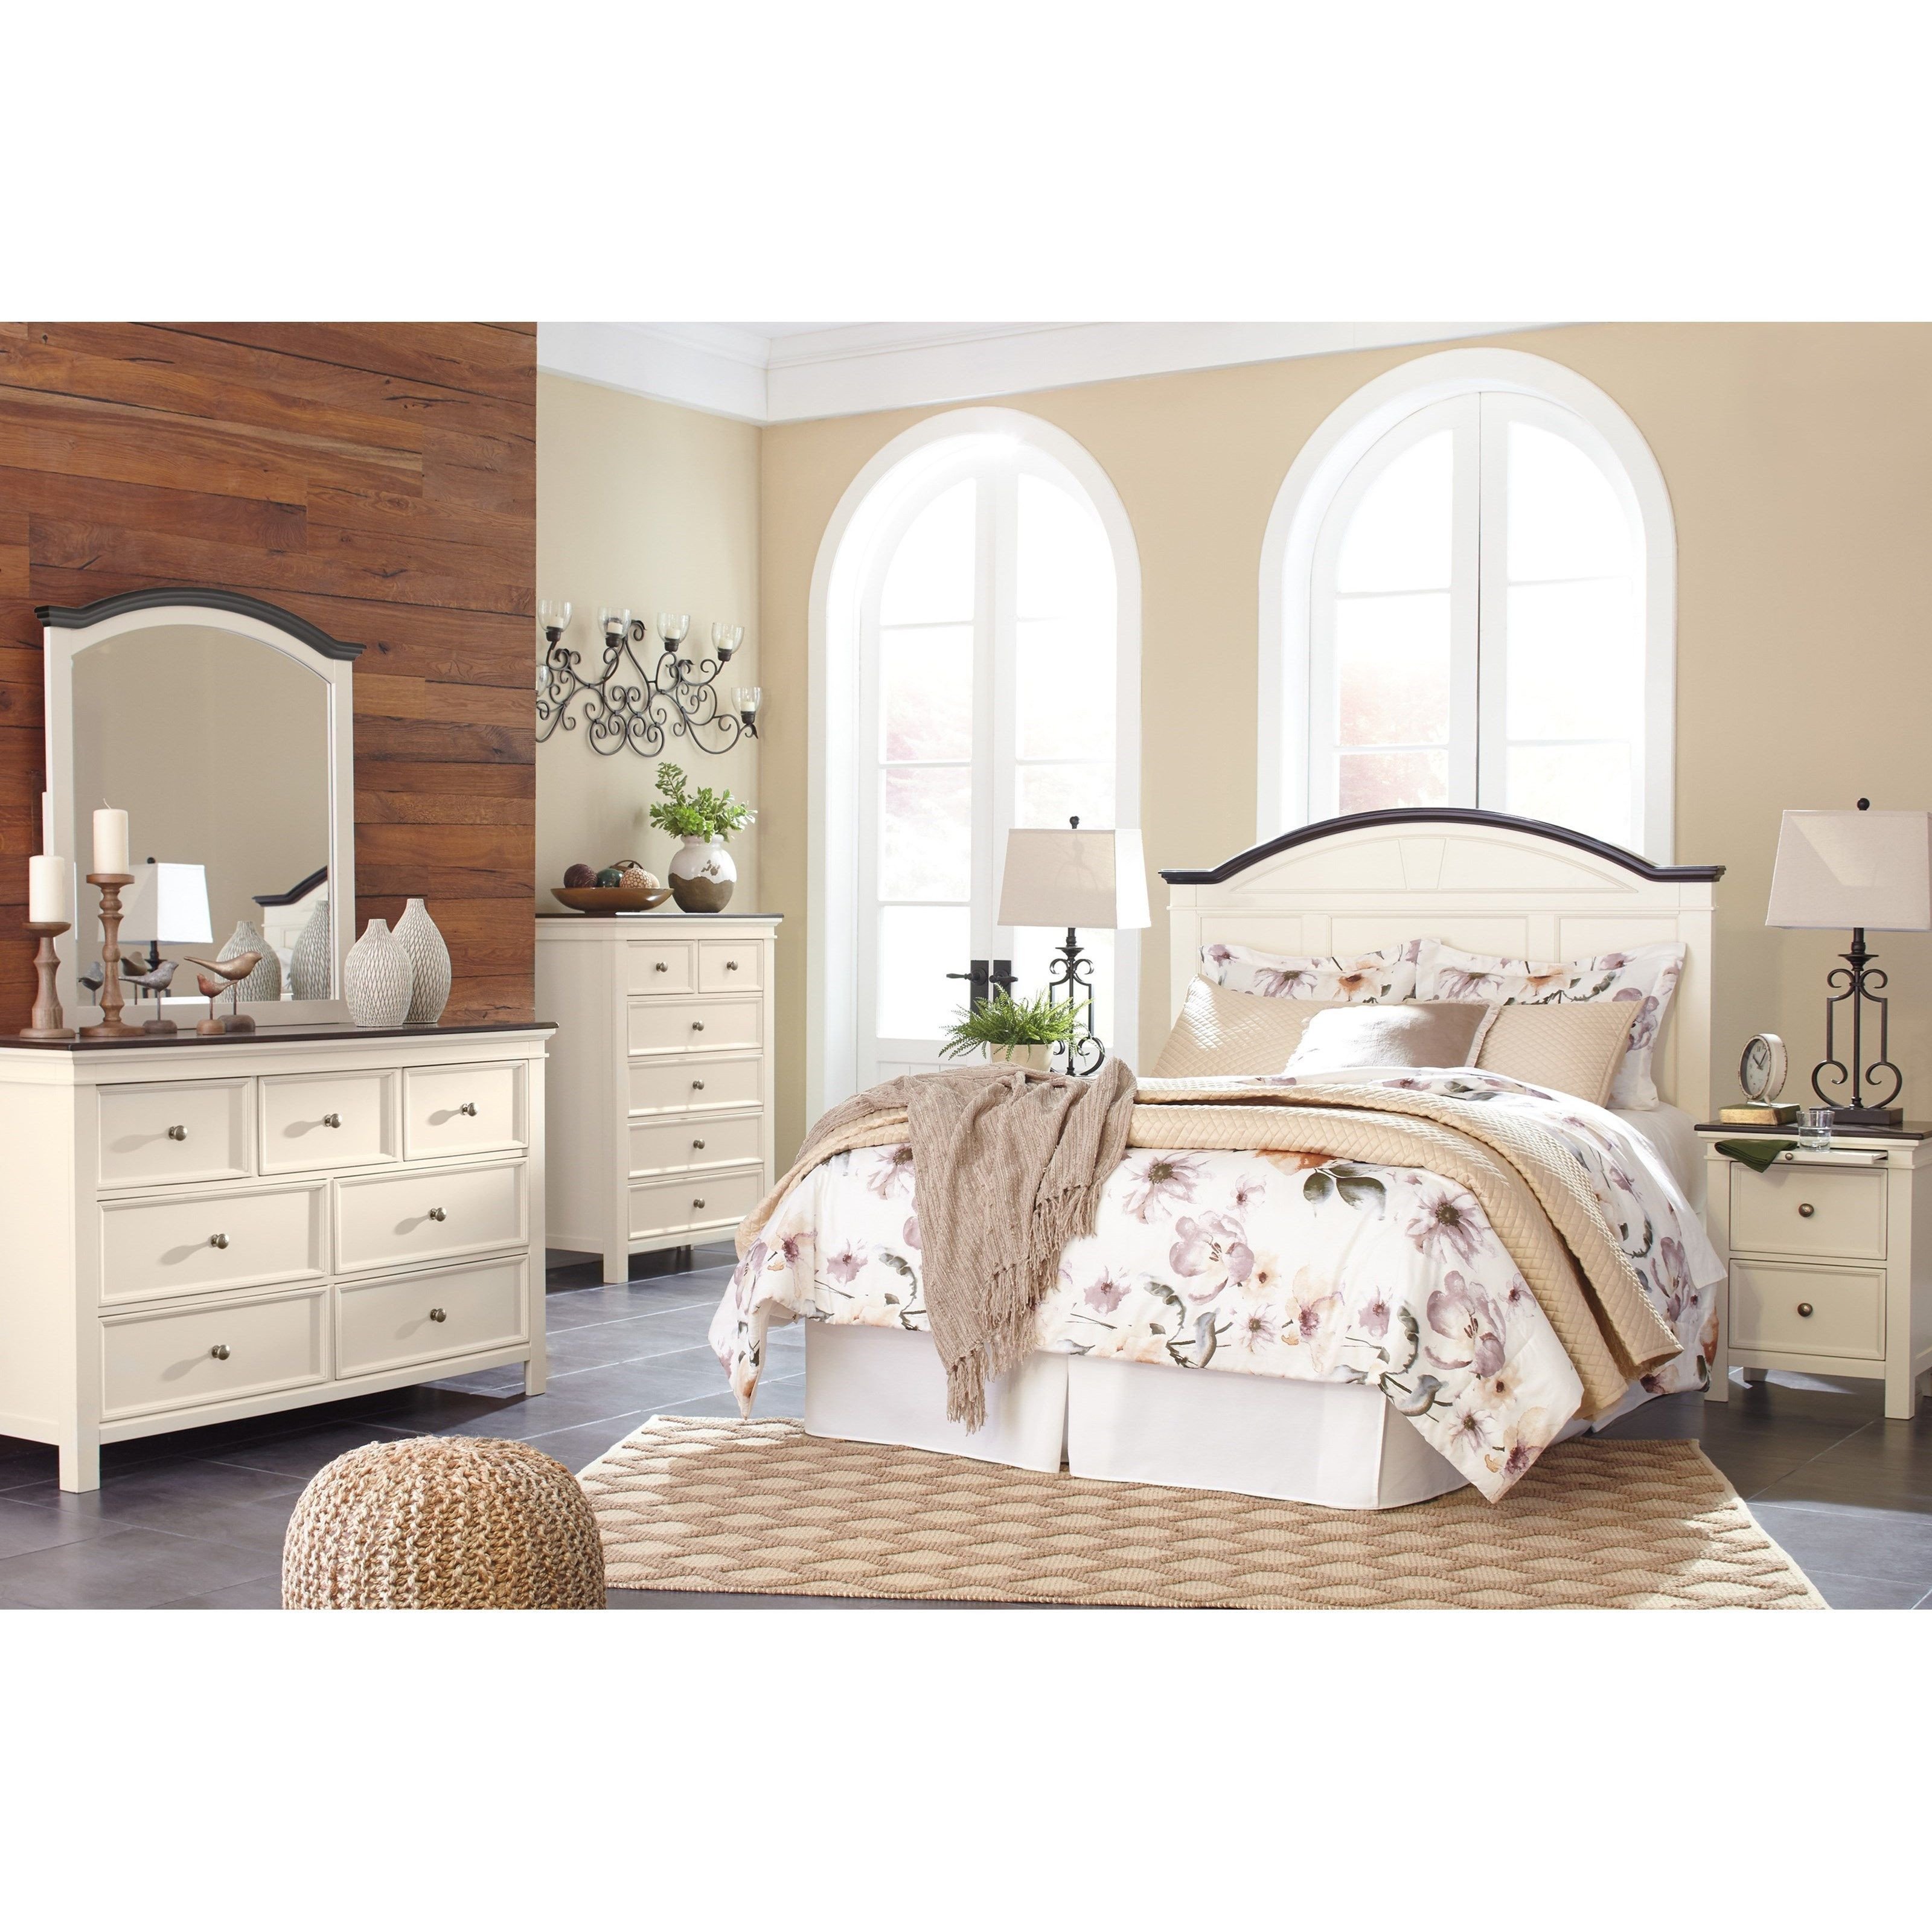 Queen Bedroom Set White Awesome Woodanville Queen Bedroom Group by Signature Design by